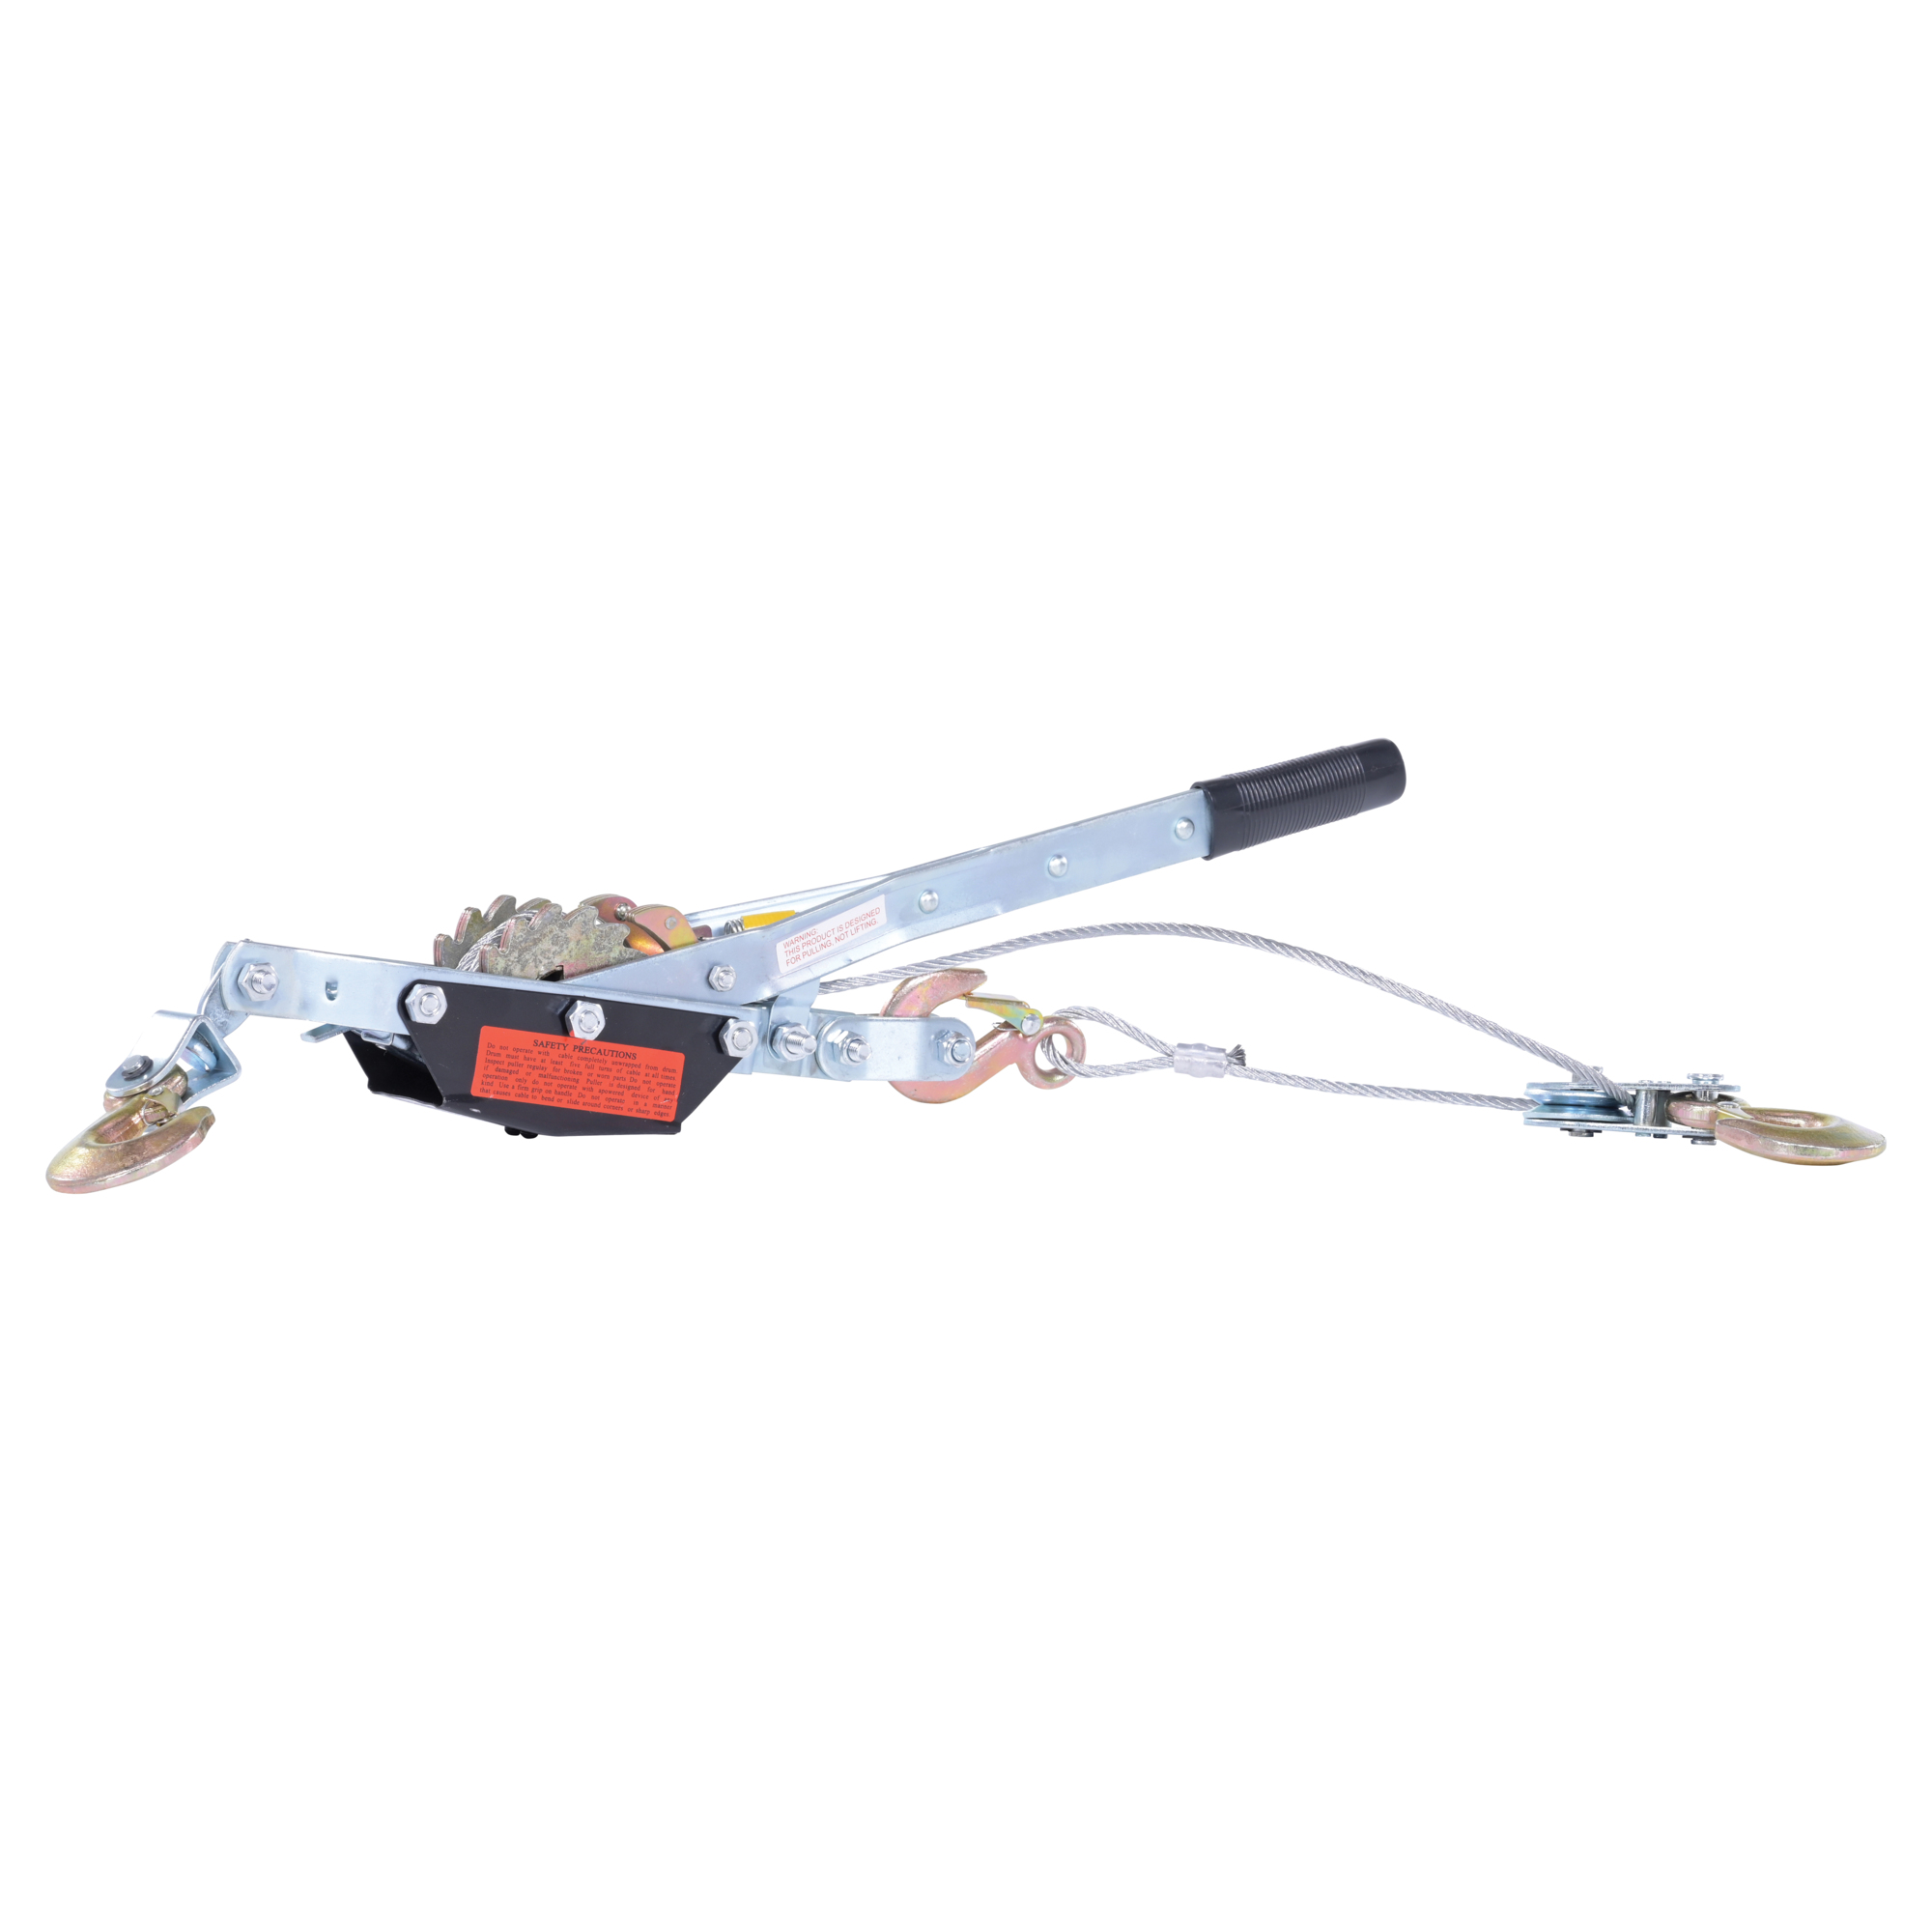 Vestil, Galvanized 2 speed cable puller 2k, Load Capacity 2000 lb, Material Galvanized Steel, Model CABLE-P4